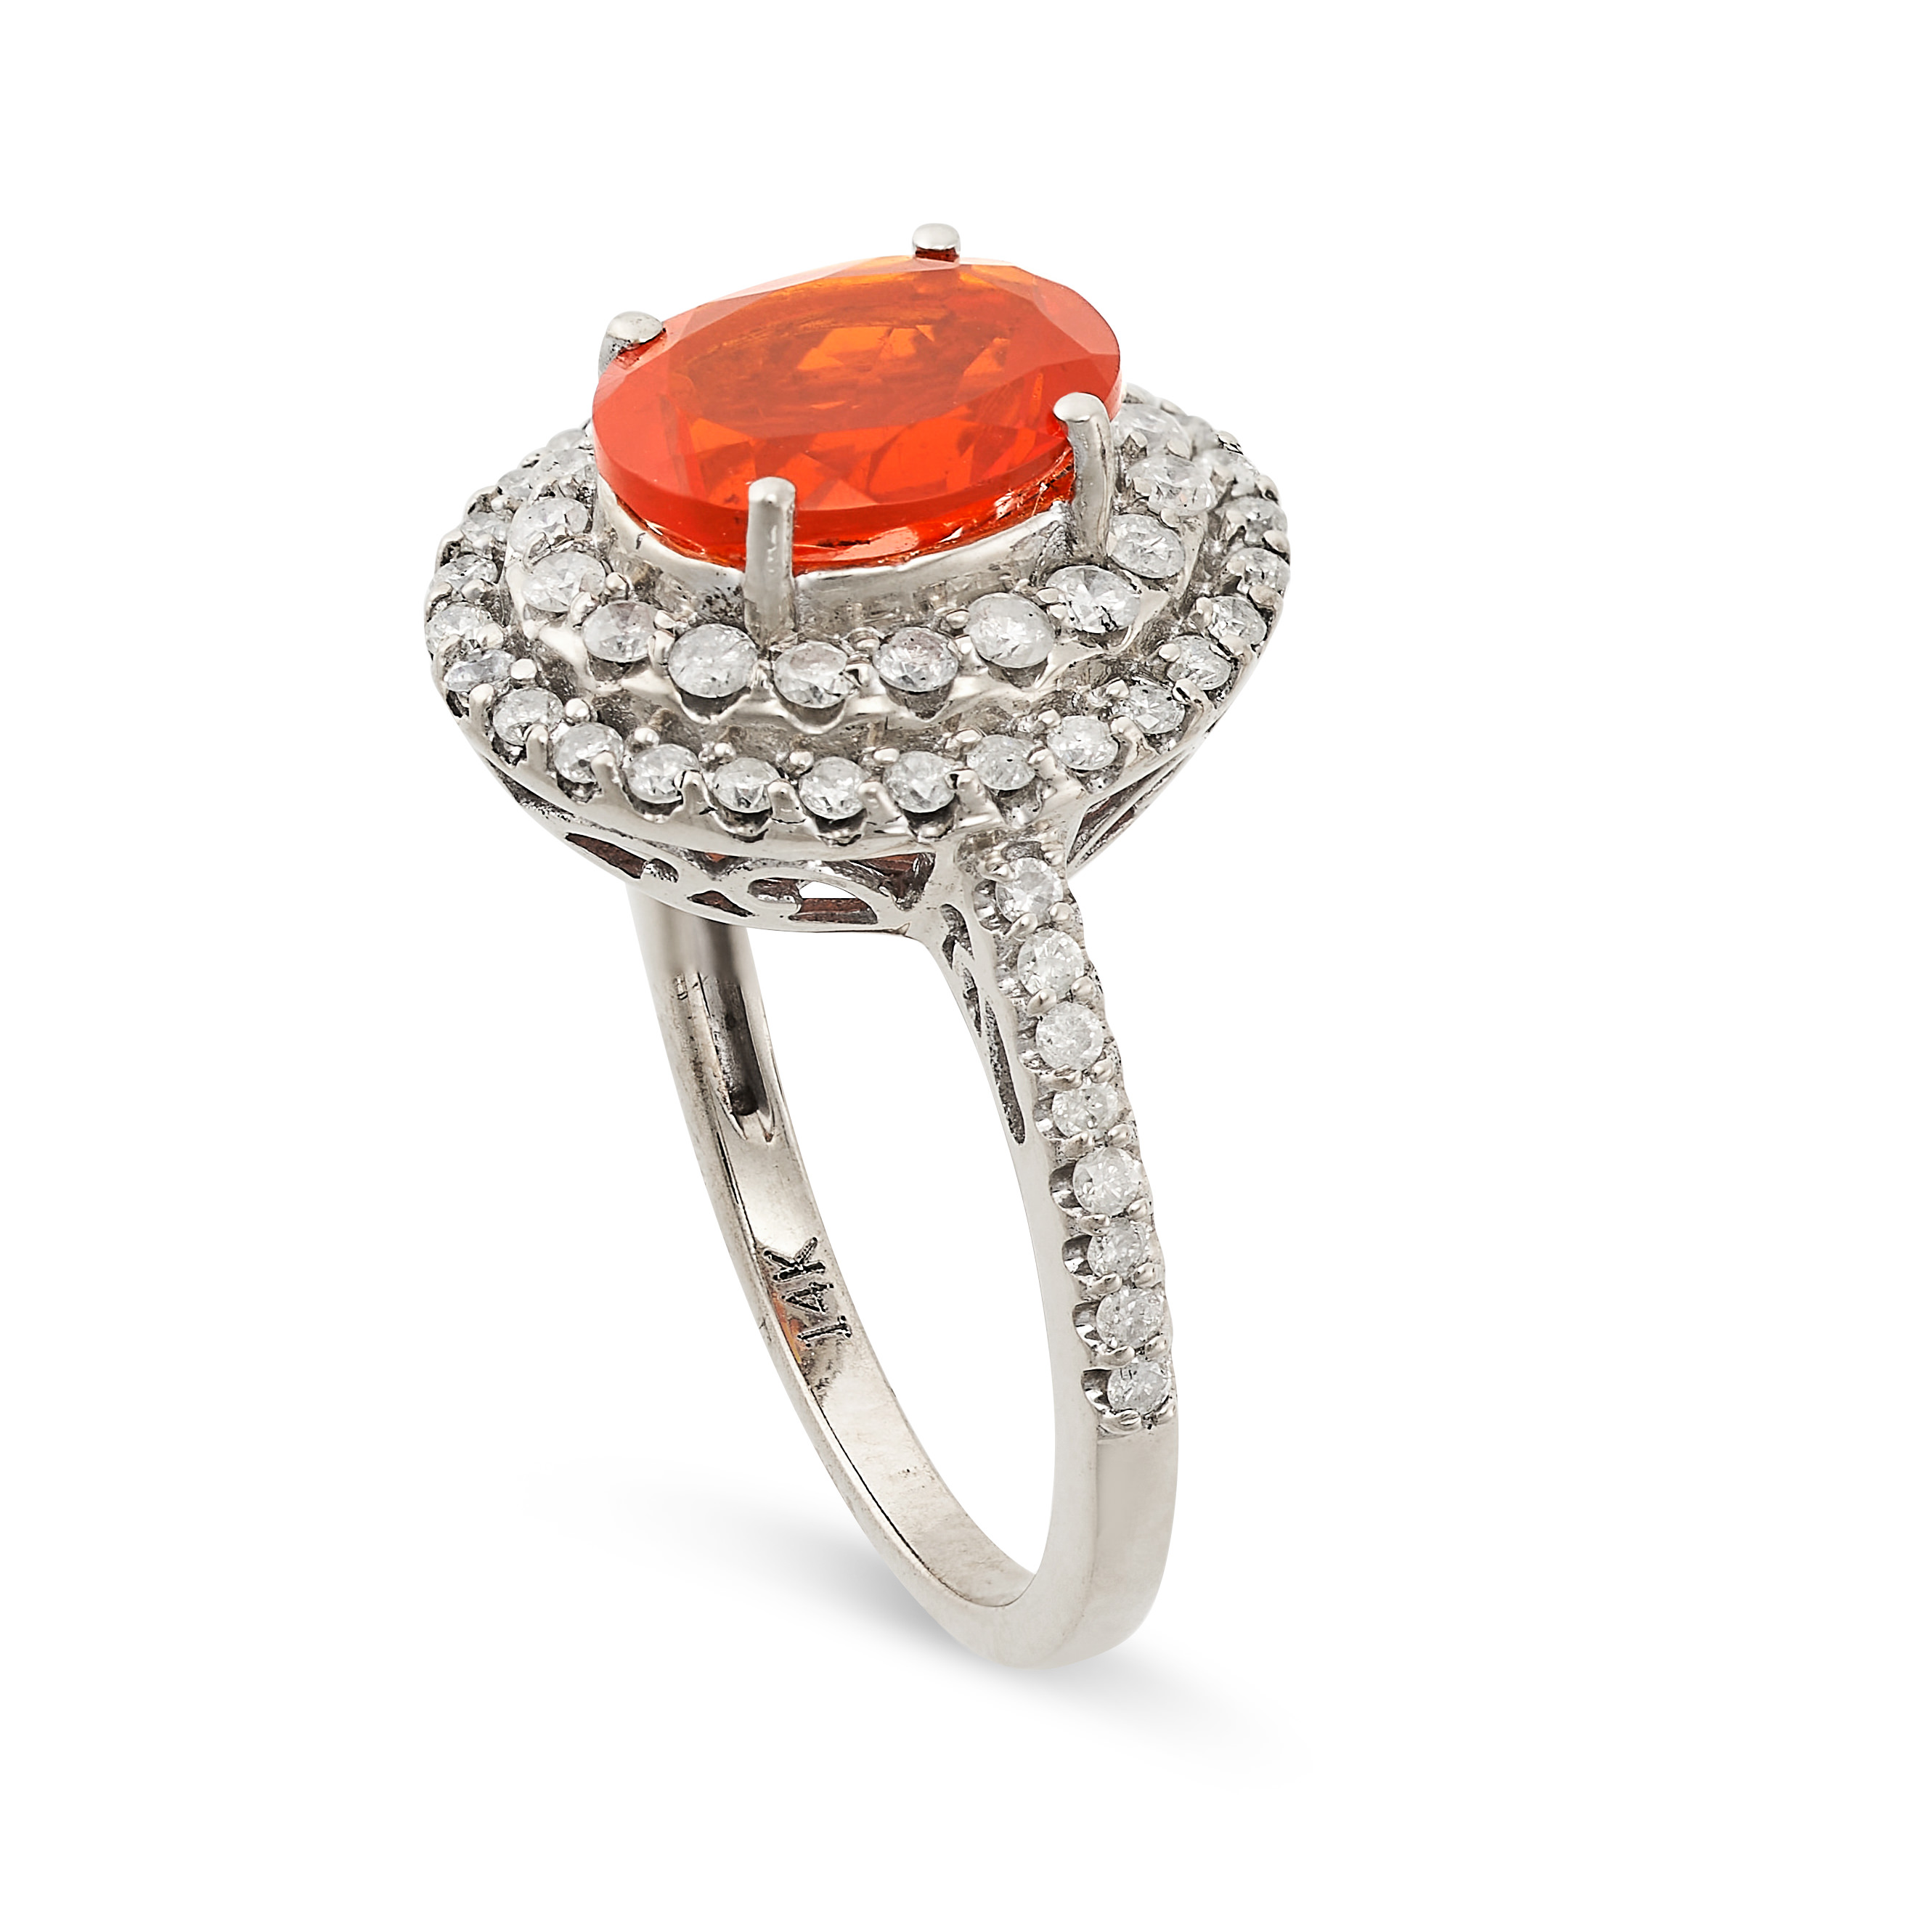 A FIRE OPAL AND DIAMOND RING set with an oval cut fire opal of 1.33 carats in a double border of - Image 2 of 2